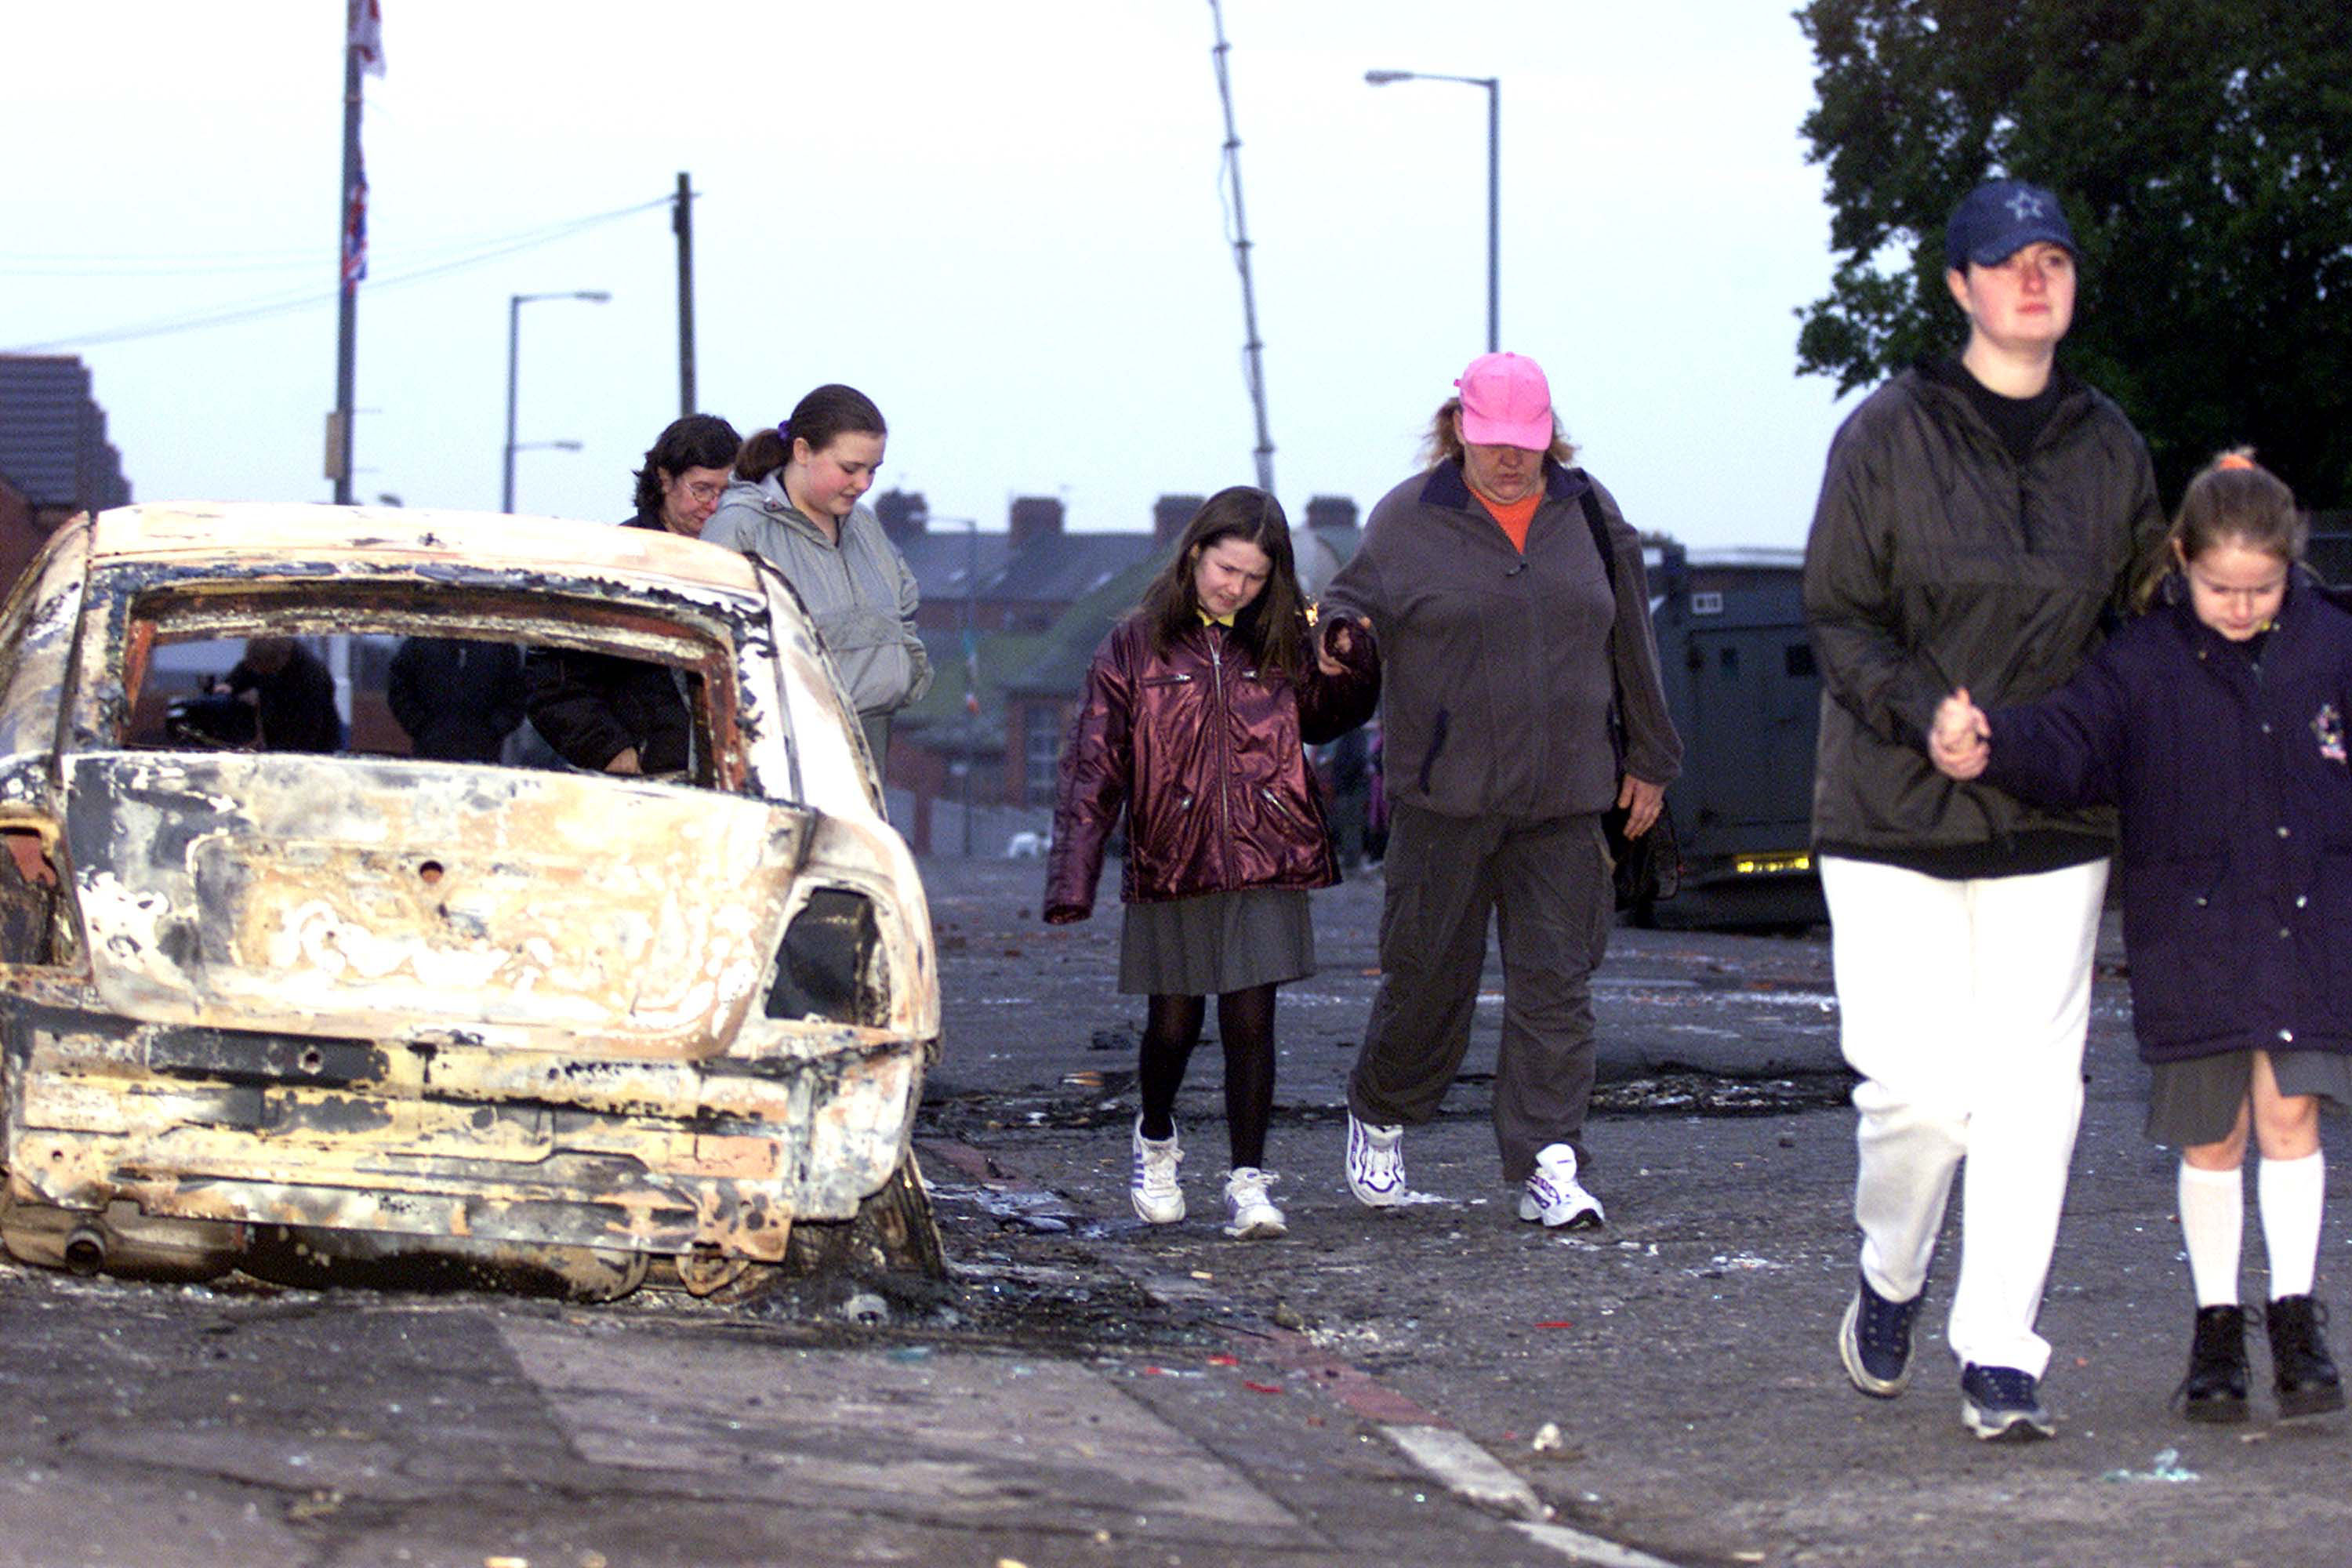 Local residents of the Glenbryn area in North Belfast walk past burnt-out remains of an armored police car following overnight rioting between Nationalists and Loyalists crowds January 10, 2002 in Belfast, Northern Ireland. Rioting erupted as Catholic parents picked up their children from the Holy Cross girls'' primary school. (Cathal McNaughton—Getty Images)